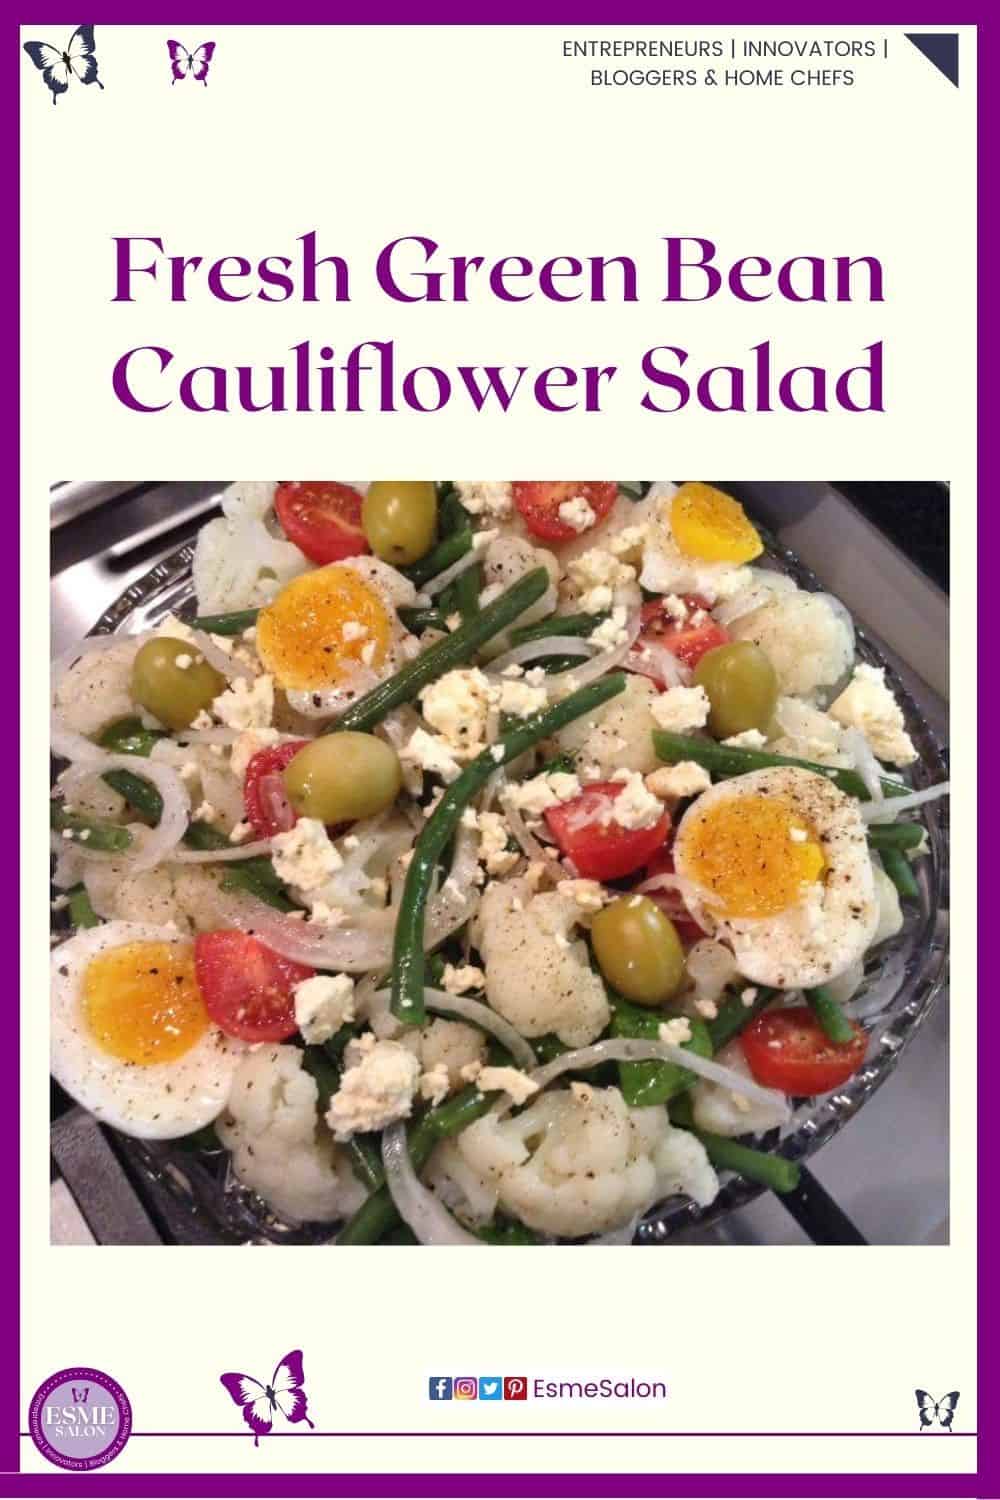 an image of a glass bowl of Fresh Green Bean Cauliflower Salad with some egg as well